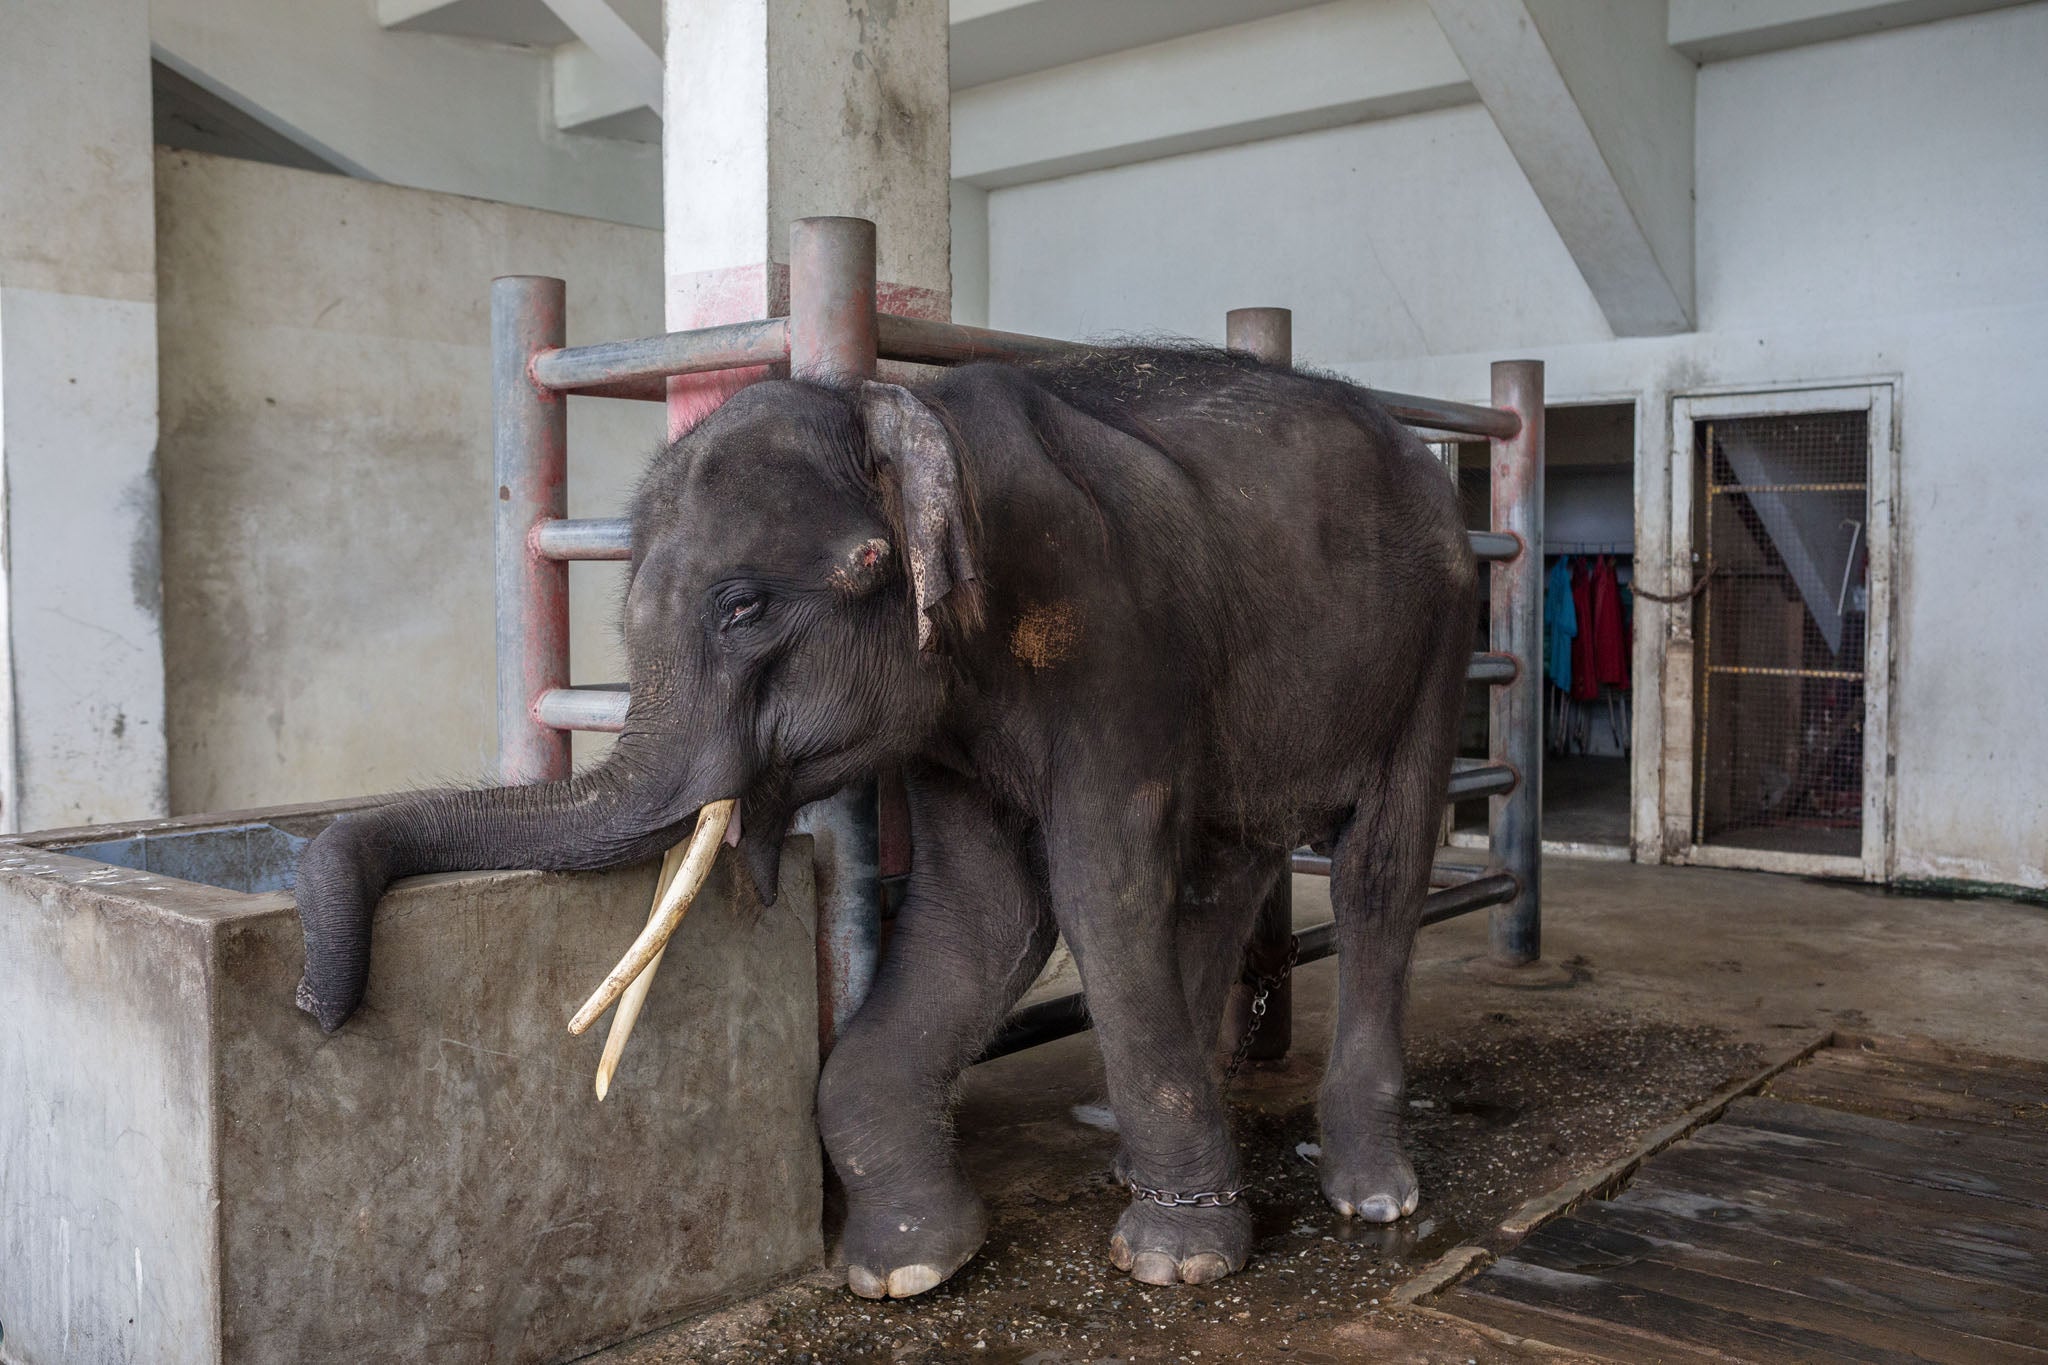 Chained & Injured Elephant Finally Gets His Happy Ending When He Is Rescued From Cramped Enclosure - WORLD OF BUZZ